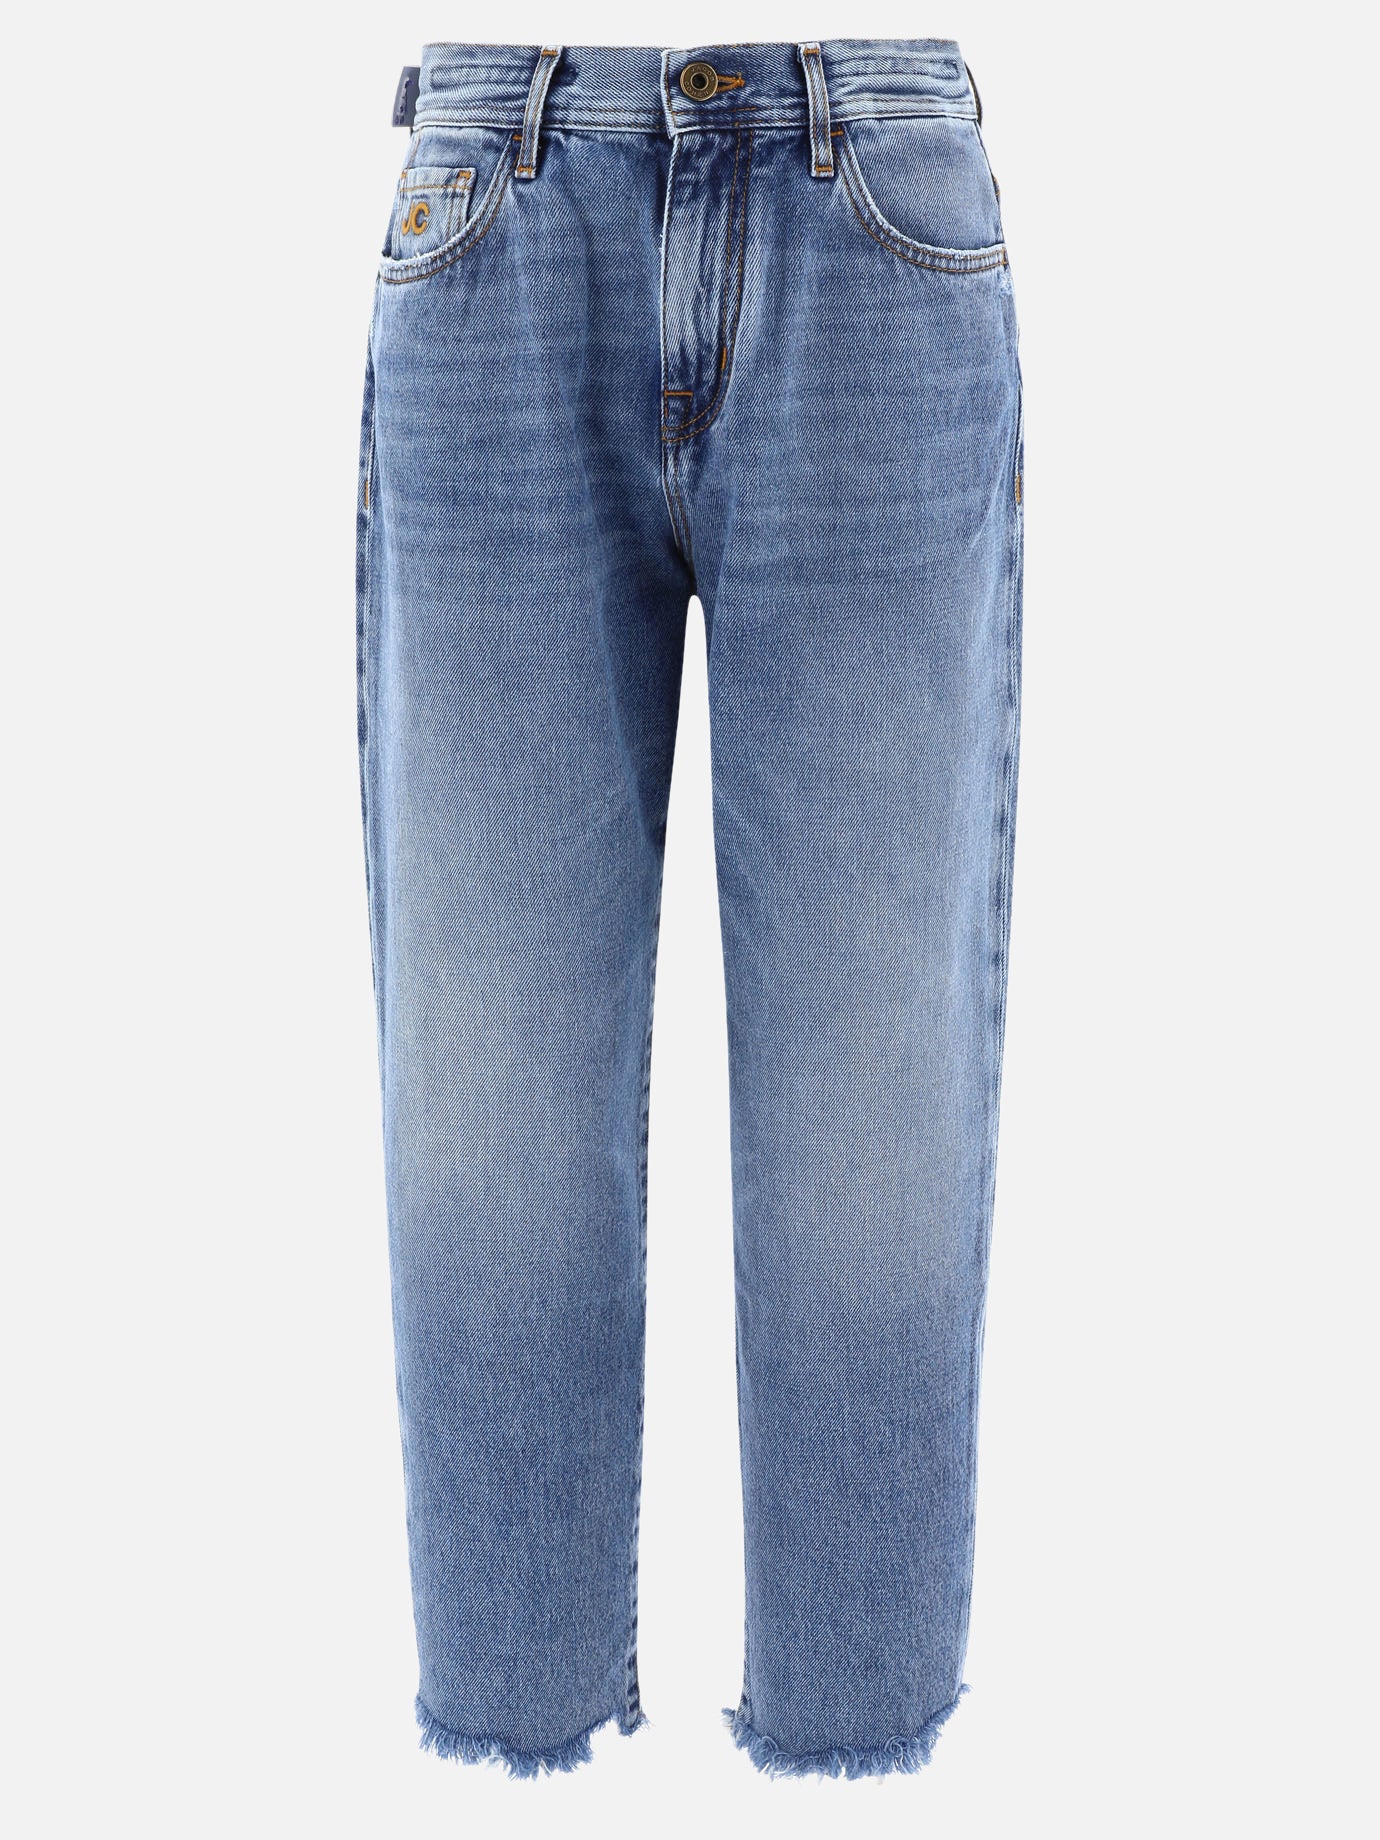 "Kendall" jeans